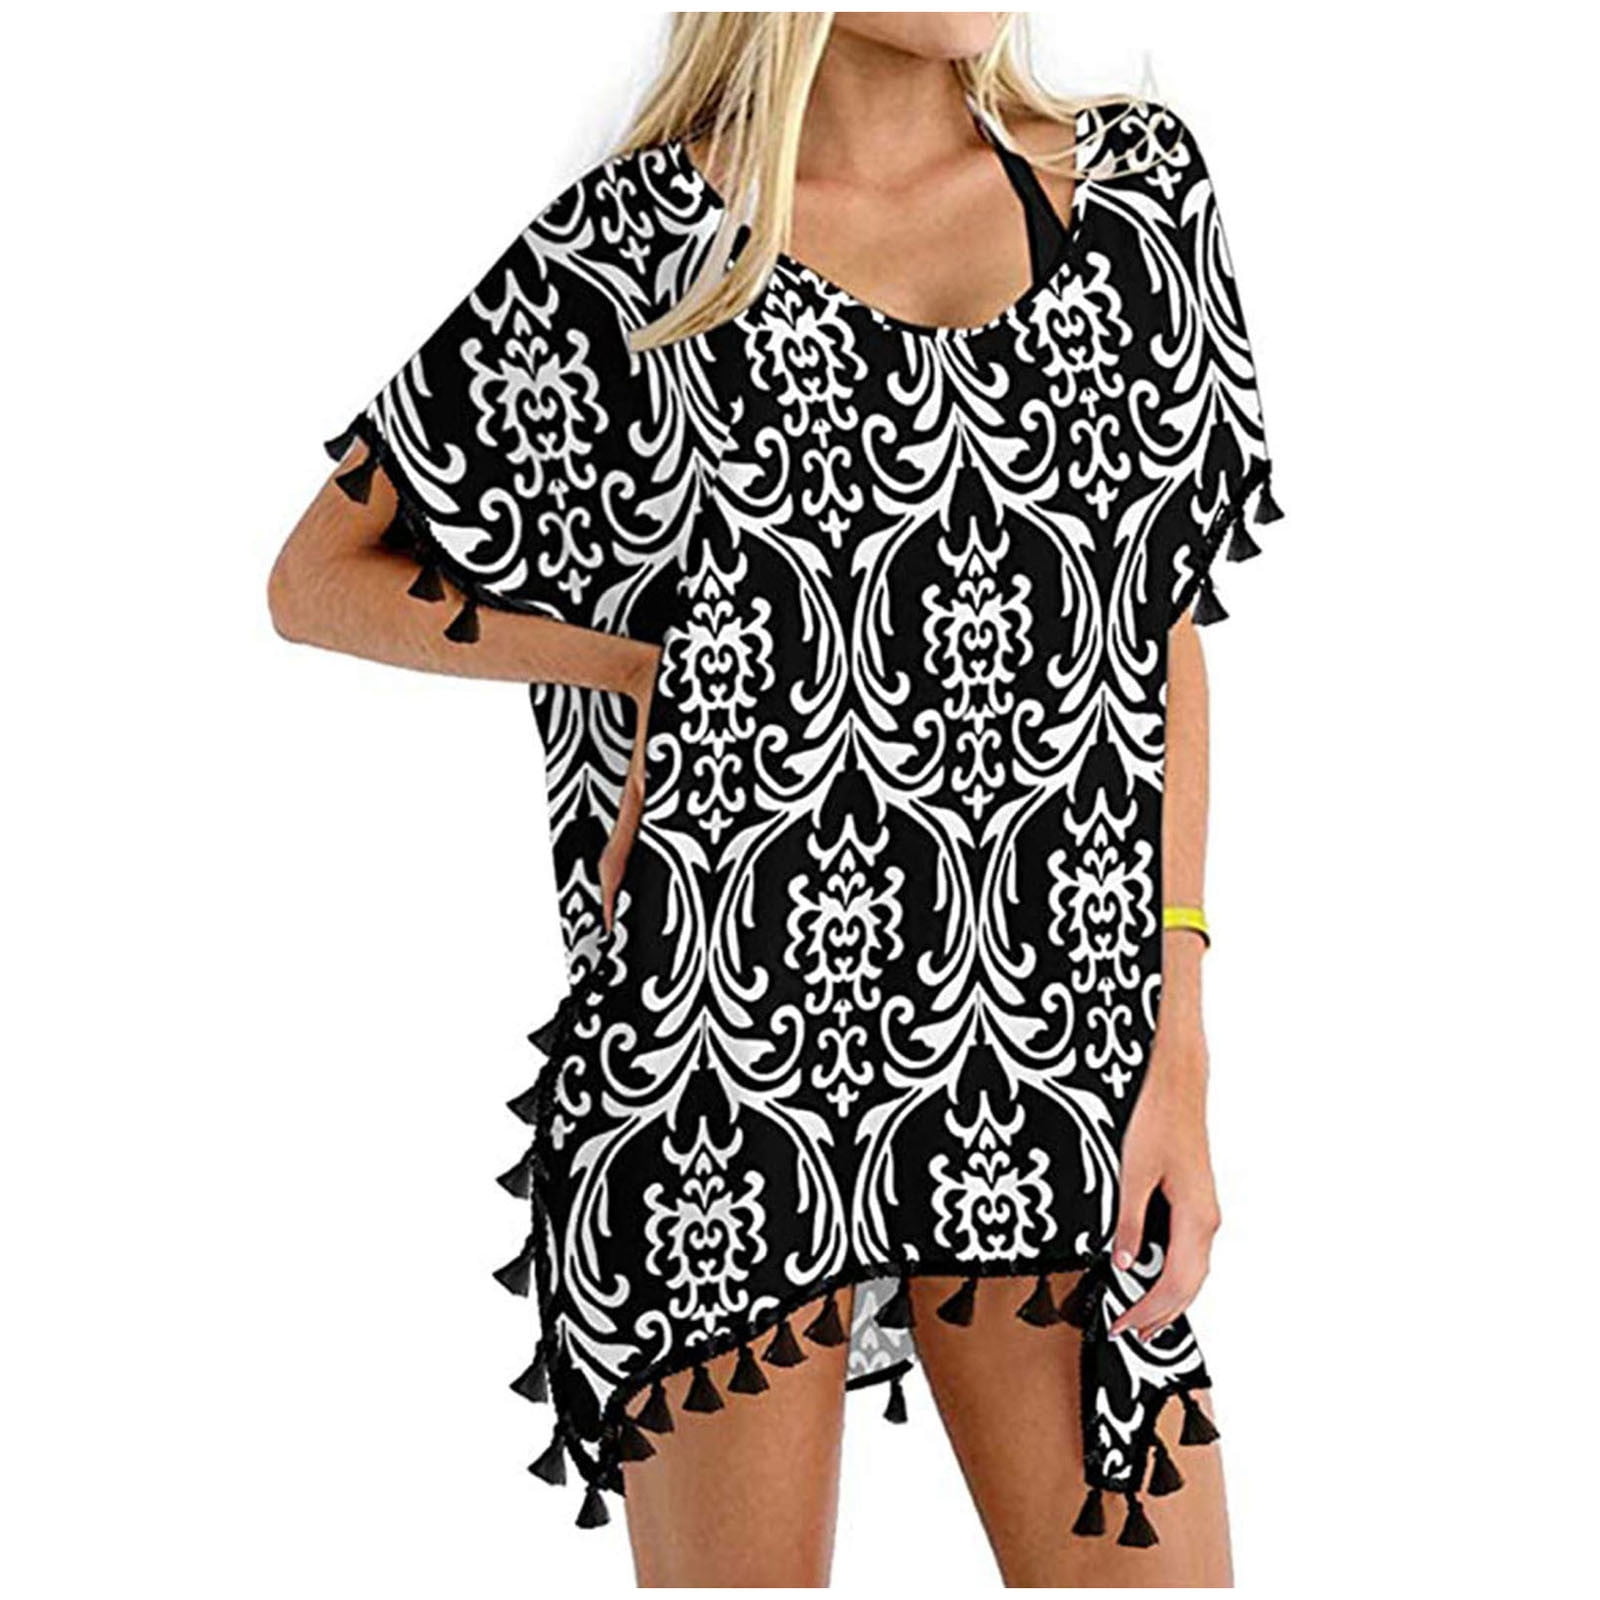 Lus Chic Womens Wrap Swimsuit Cover Up Spaghetti Strap V Neck Backless Long Beach Dress